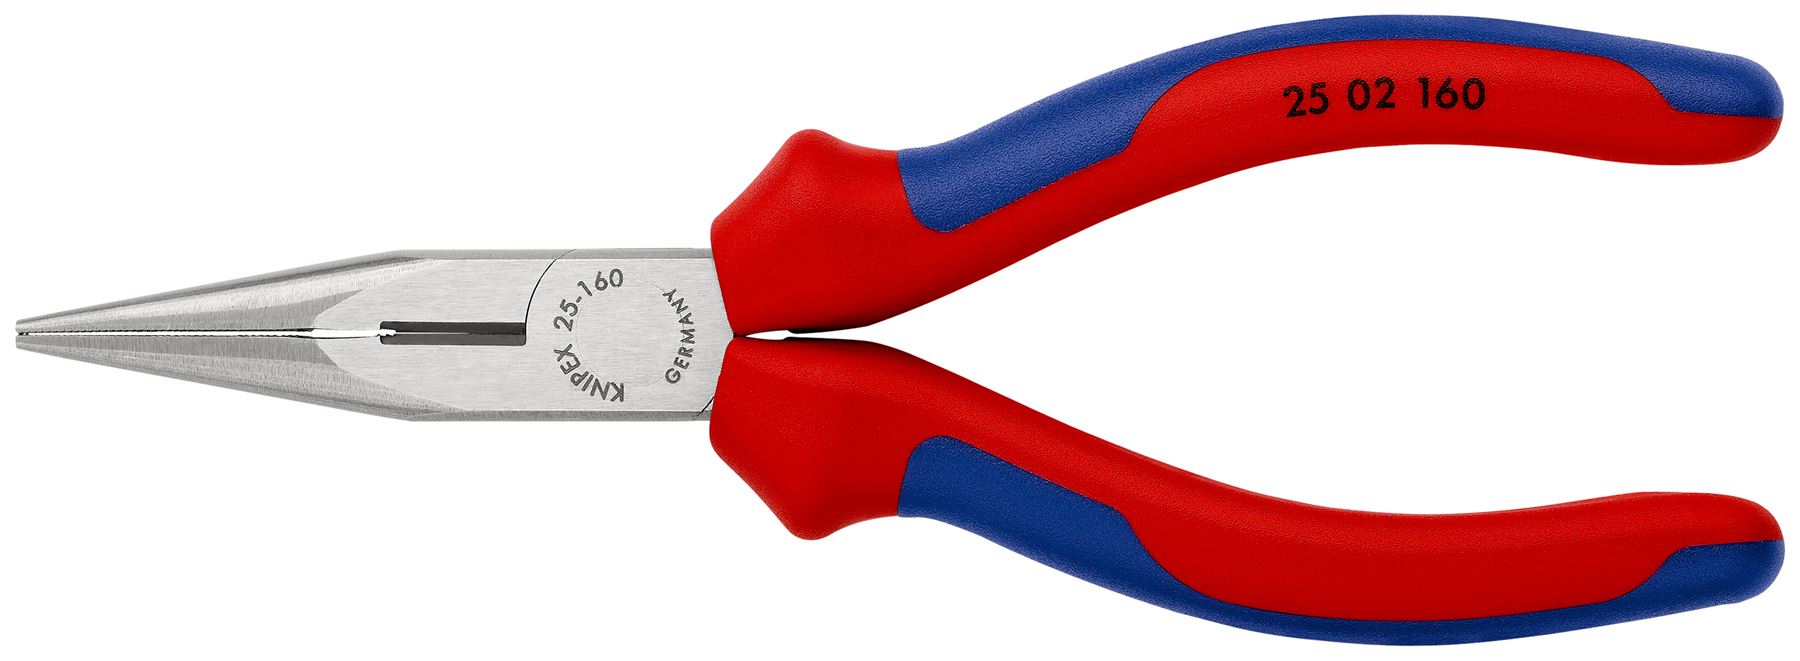 Knipex Snipe Nose Side Cutting Pliers 160mm Long Nose Radio Plier 25 02 160